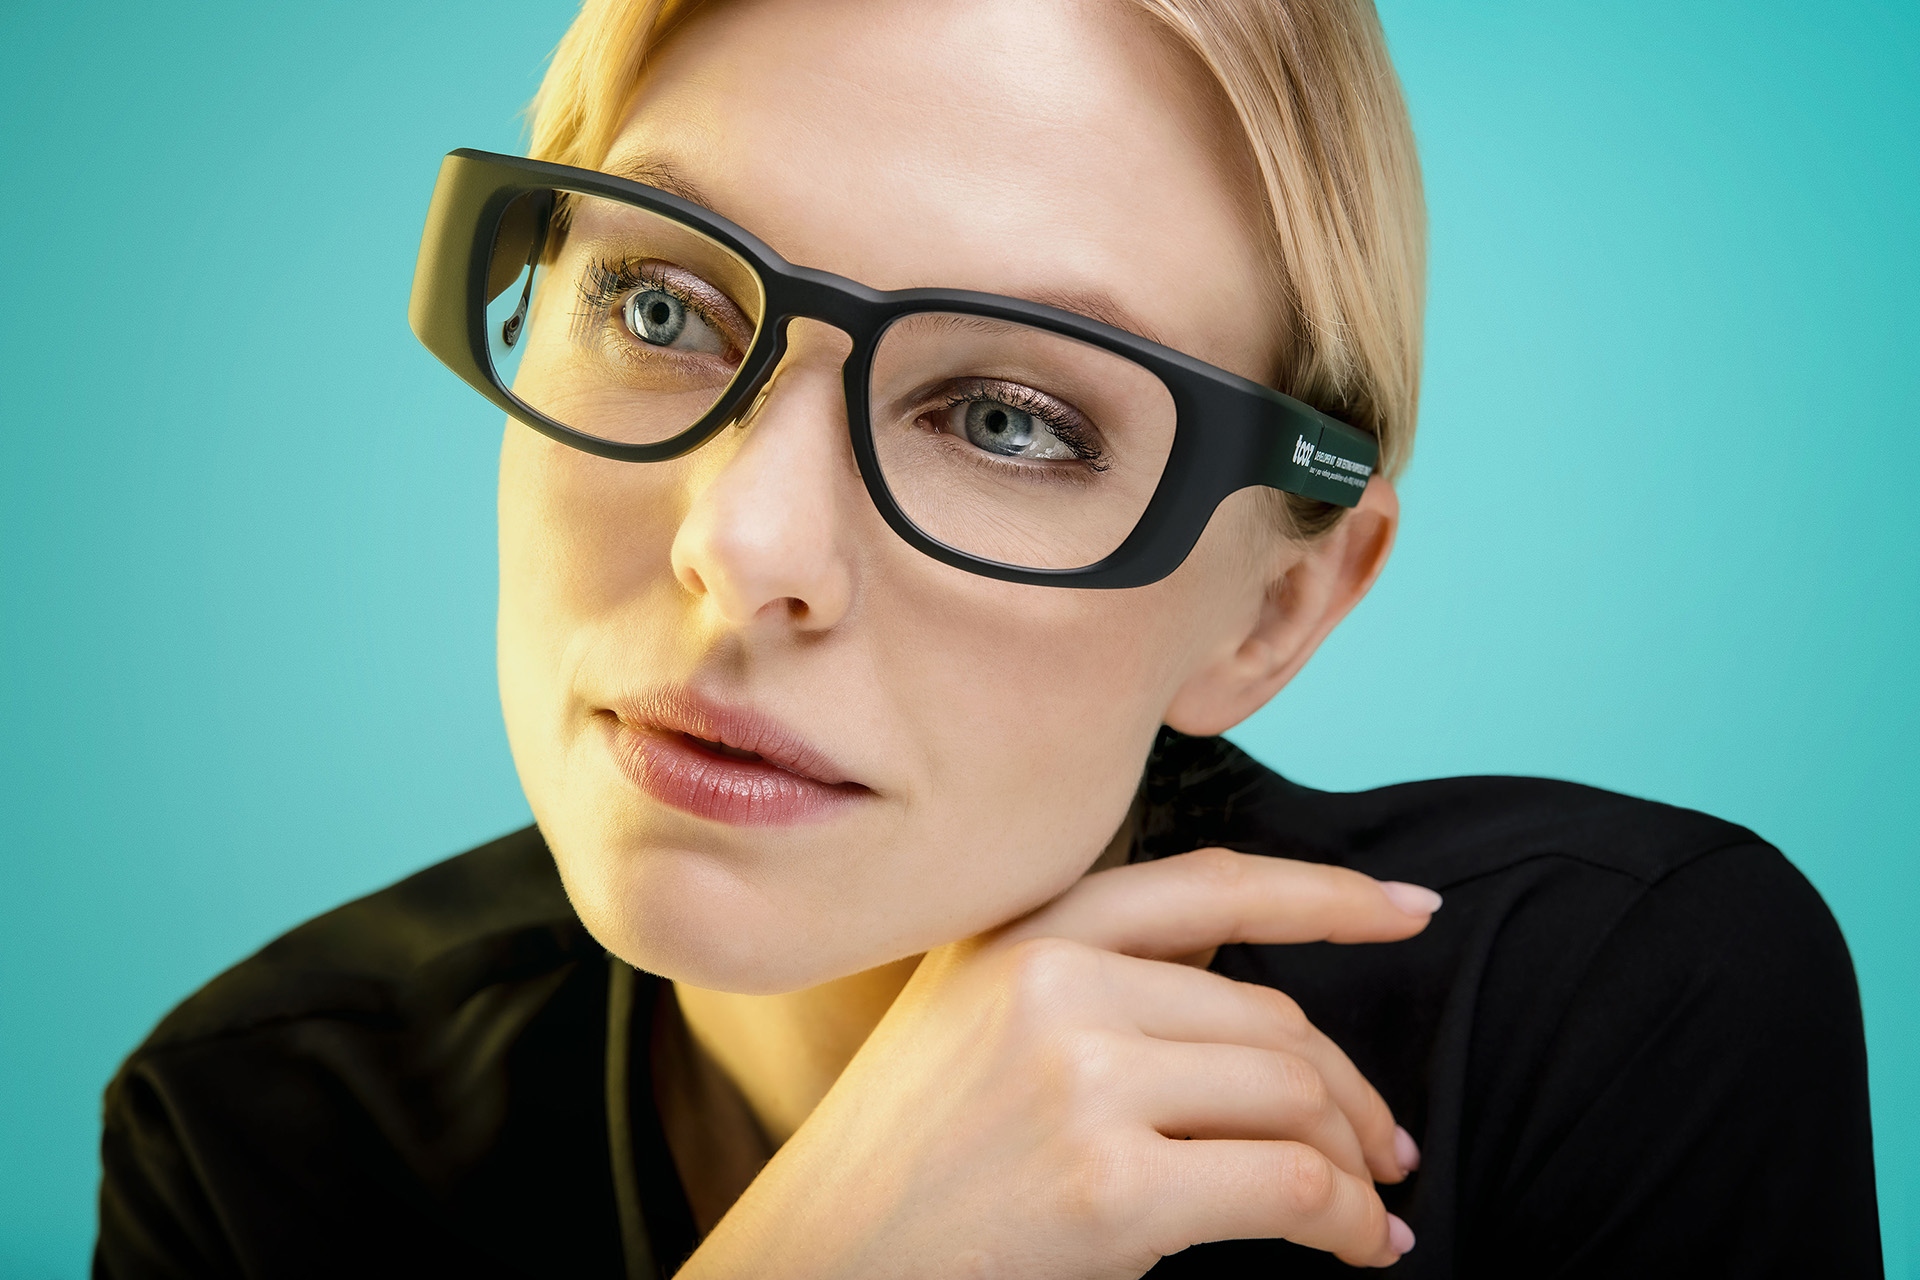 The tooz DevKit, a pair of smart glasses for developers, is launched in Germany (© tooz technologies).